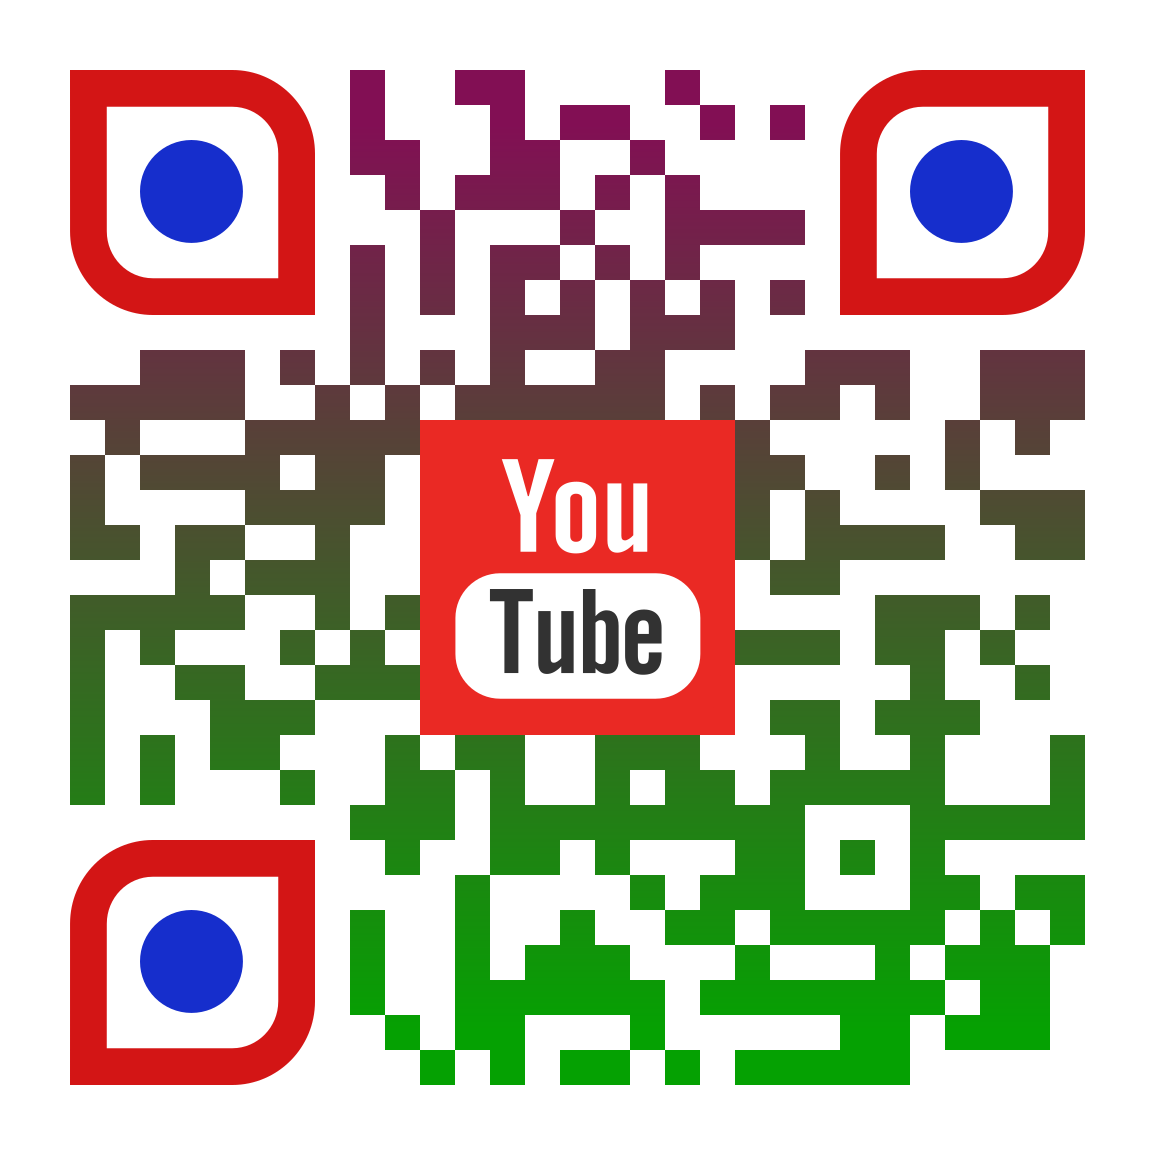 Customise qrcode for your project with different colour,logo,text,email id.